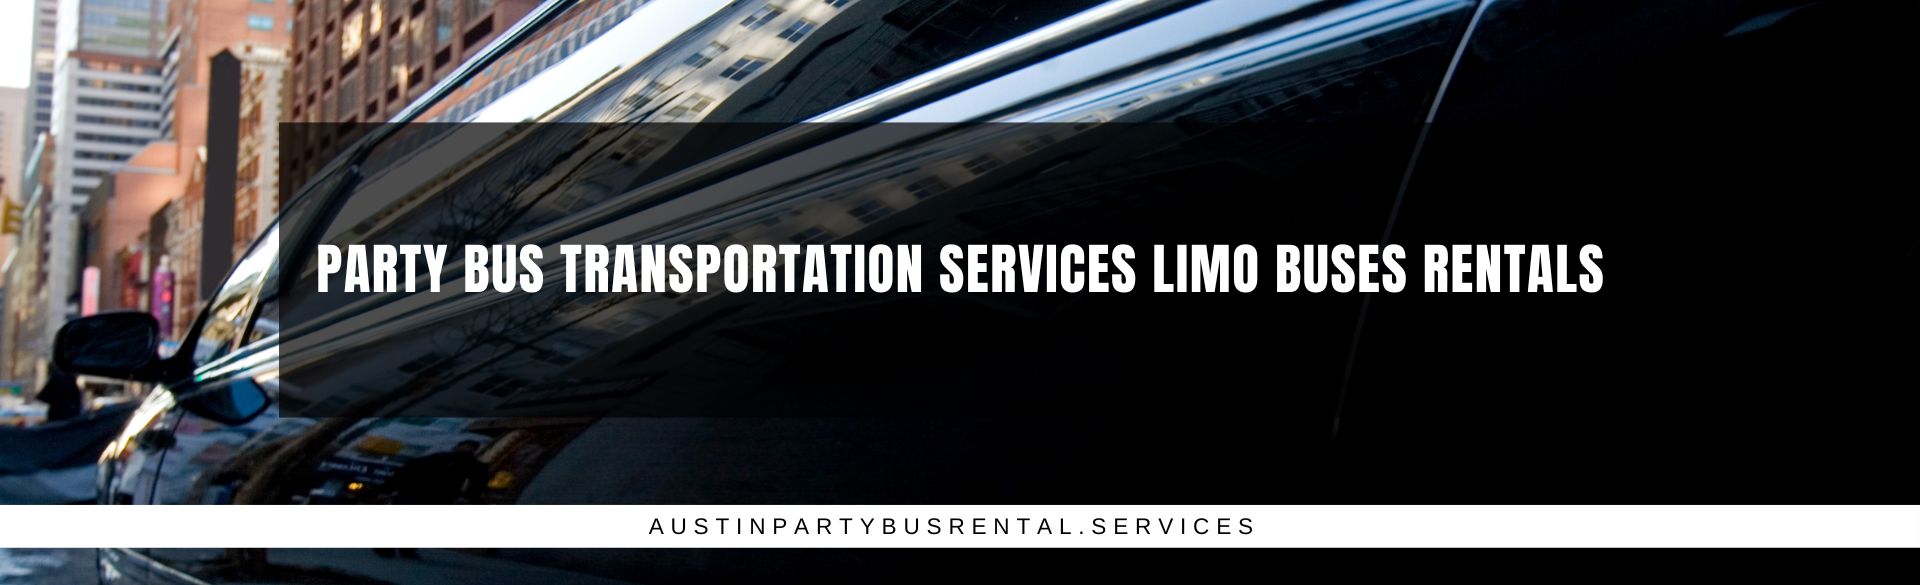 Party Bus Transportation Services Limo Buses Rentals